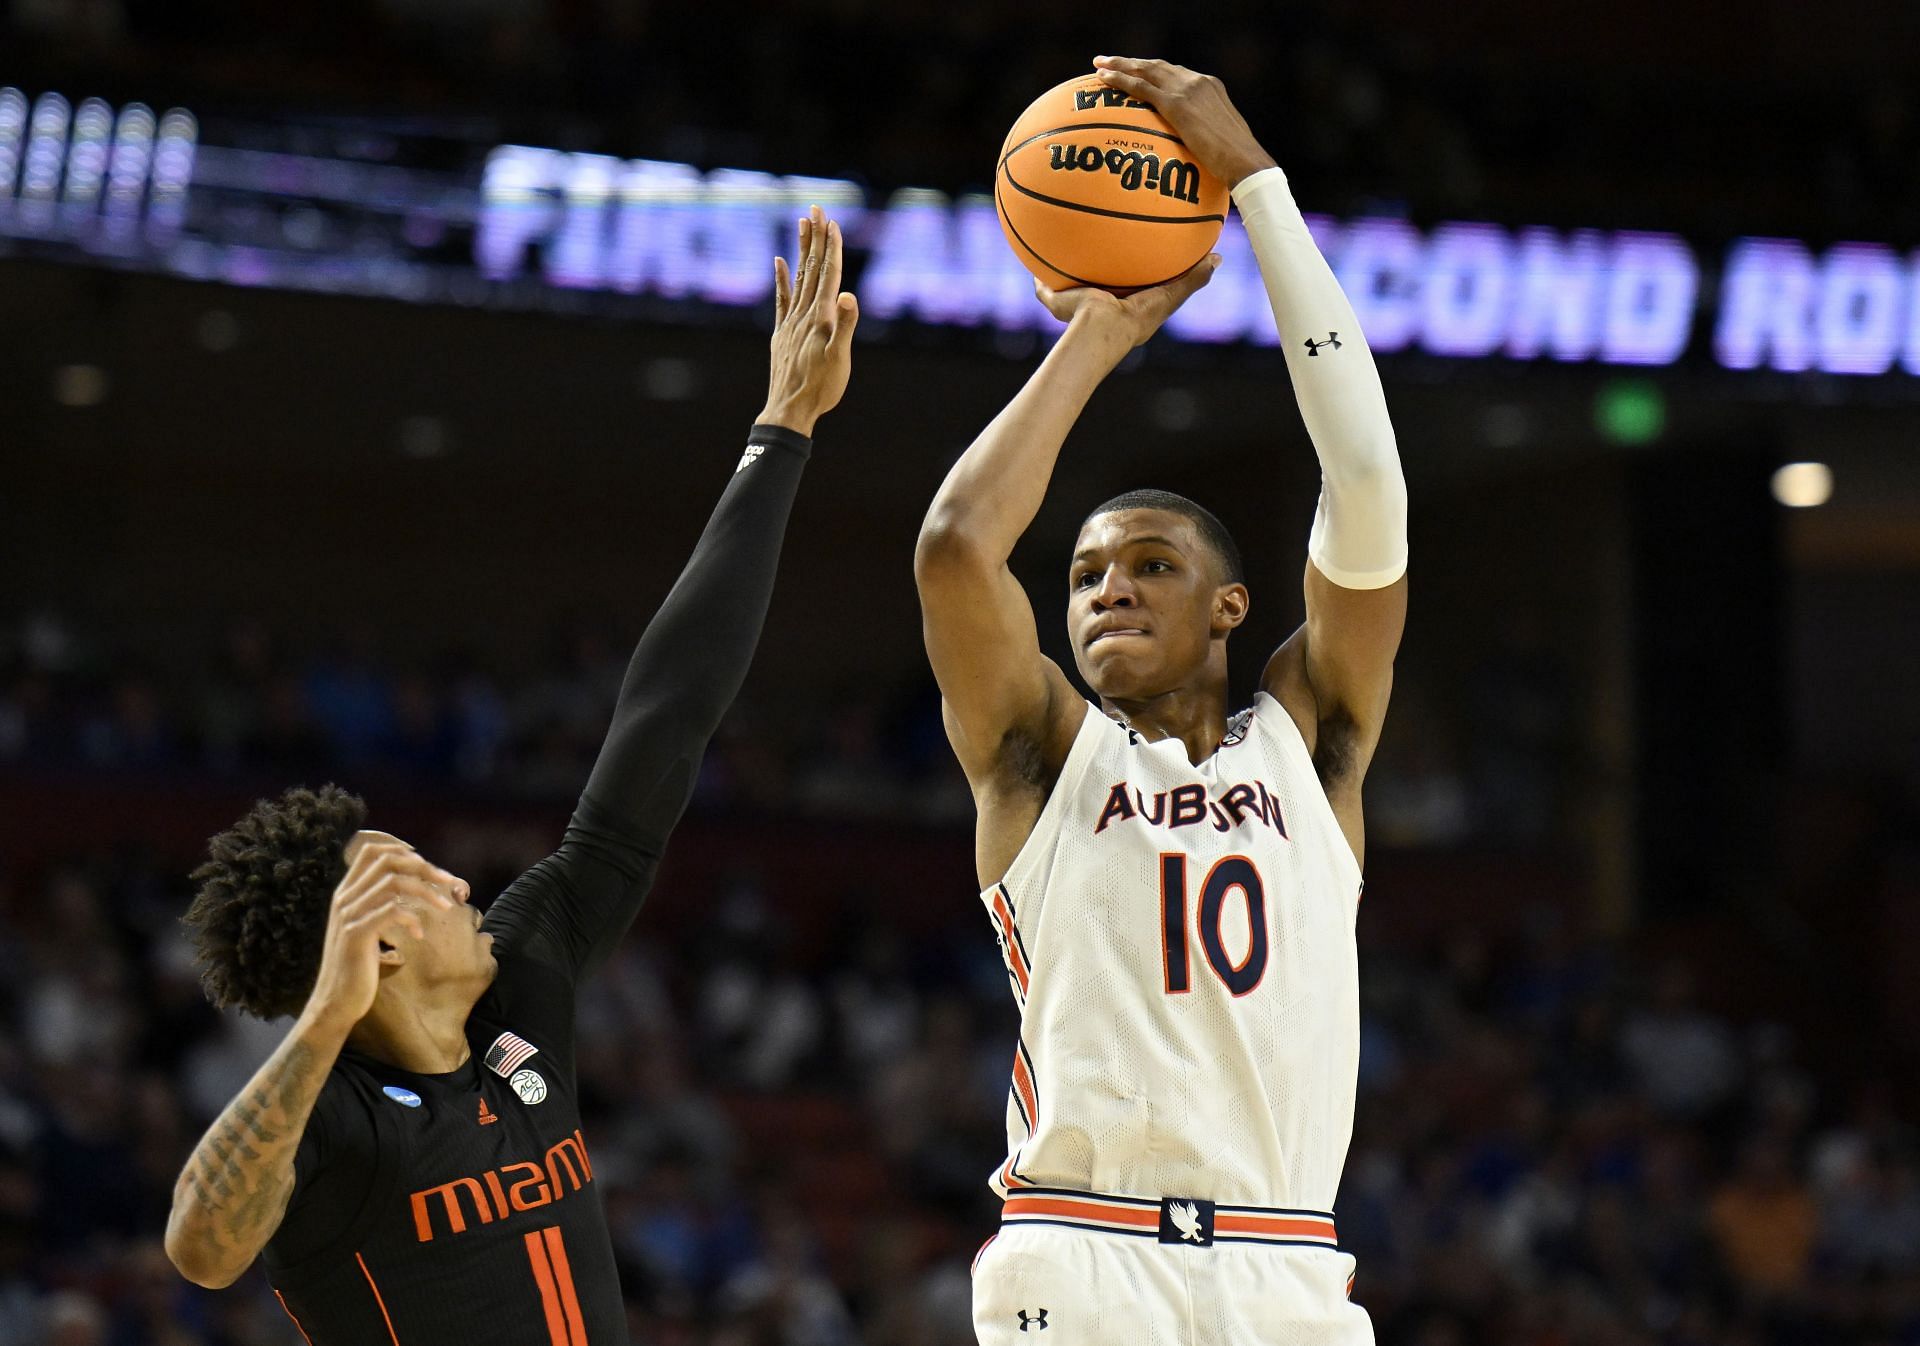 If head coach Bruce Pearl is correct, Jabari Smith Jr. could make a significant impact after the NBA Draft.